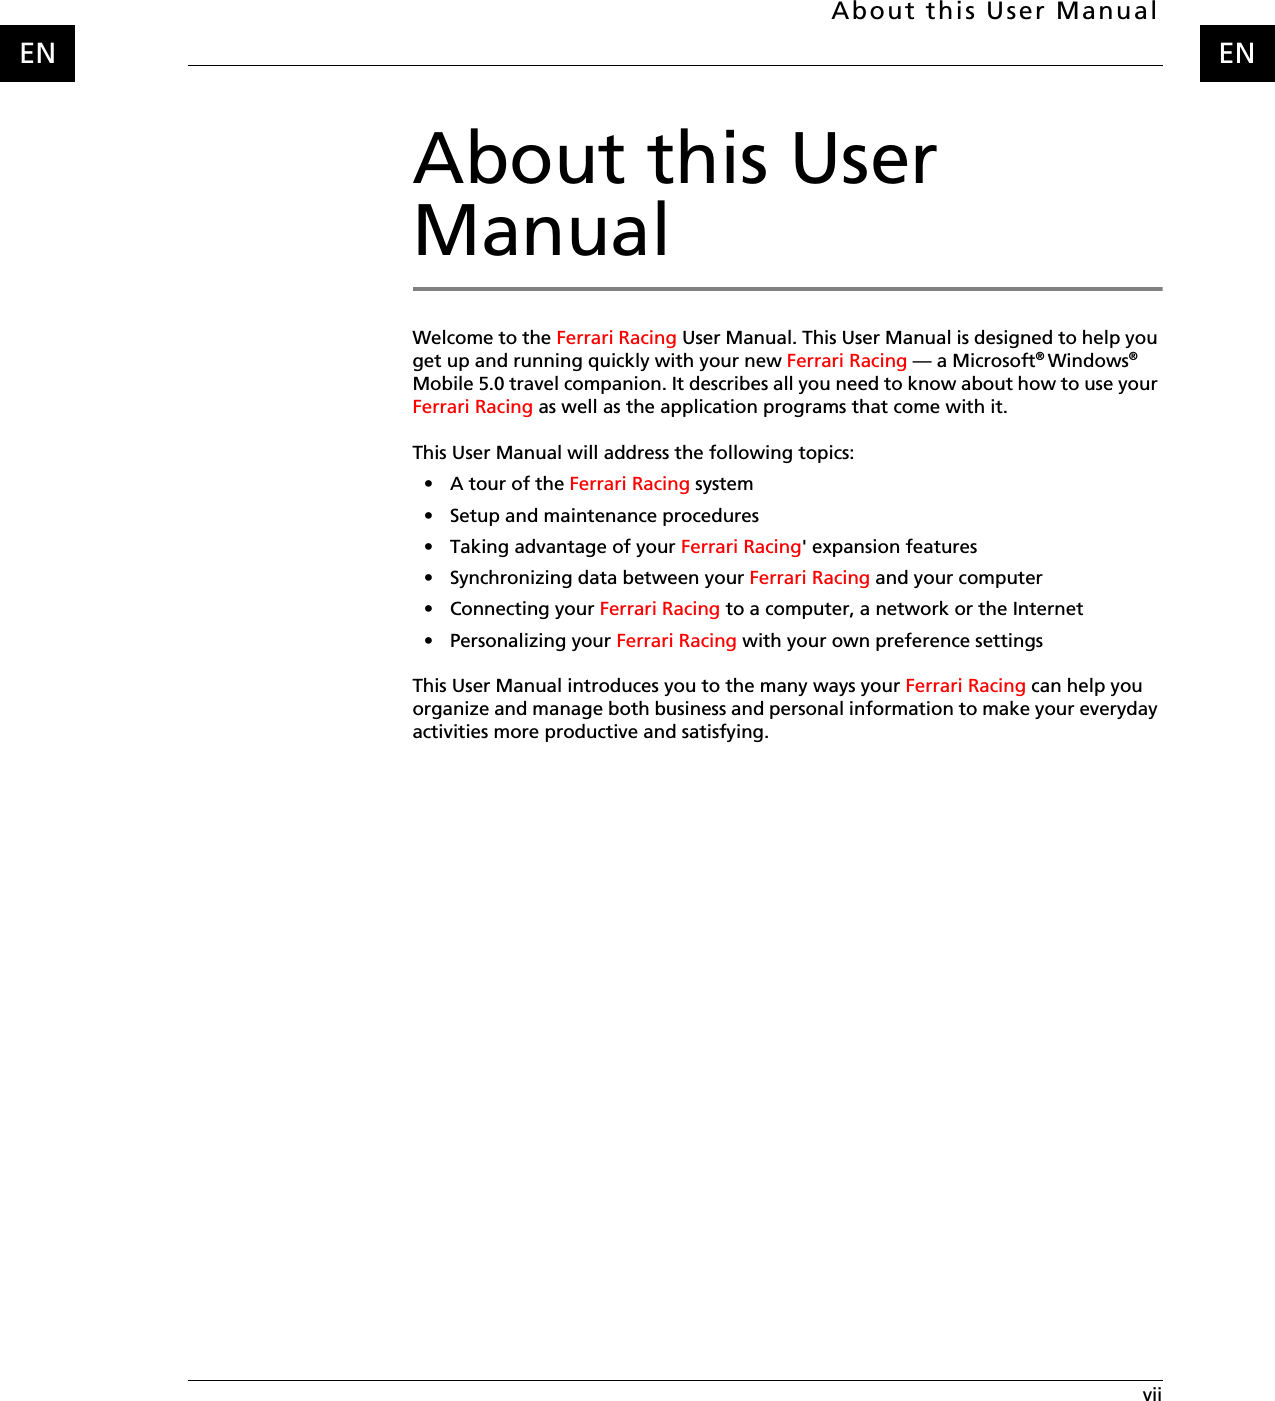 About this User Manual viiENENAbout this User ManualWelcome to the Ferrari Racing User Manual. This User Manual is designed to help you get up and running quickly with your new Ferrari Racing — a Microsoft® Windows® Mobile 5.0 travel companion. It describes all you need to know about how to use your Ferrari Racing as well as the application programs that come with it.This User Manual will address the following topics:•A tour of the Ferrari Racing system• Setup and maintenance procedures• Taking advantage of your Ferrari Racing&apos; expansion features• Synchronizing data between your Ferrari Racing and your computer• Connecting your Ferrari Racing to a computer, a network or the Internet• Personalizing your Ferrari Racing with your own preference settingsThis User Manual introduces you to the many ways your Ferrari Racing can help you organize and manage both business and personal information to make your everyday activities more productive and satisfying.